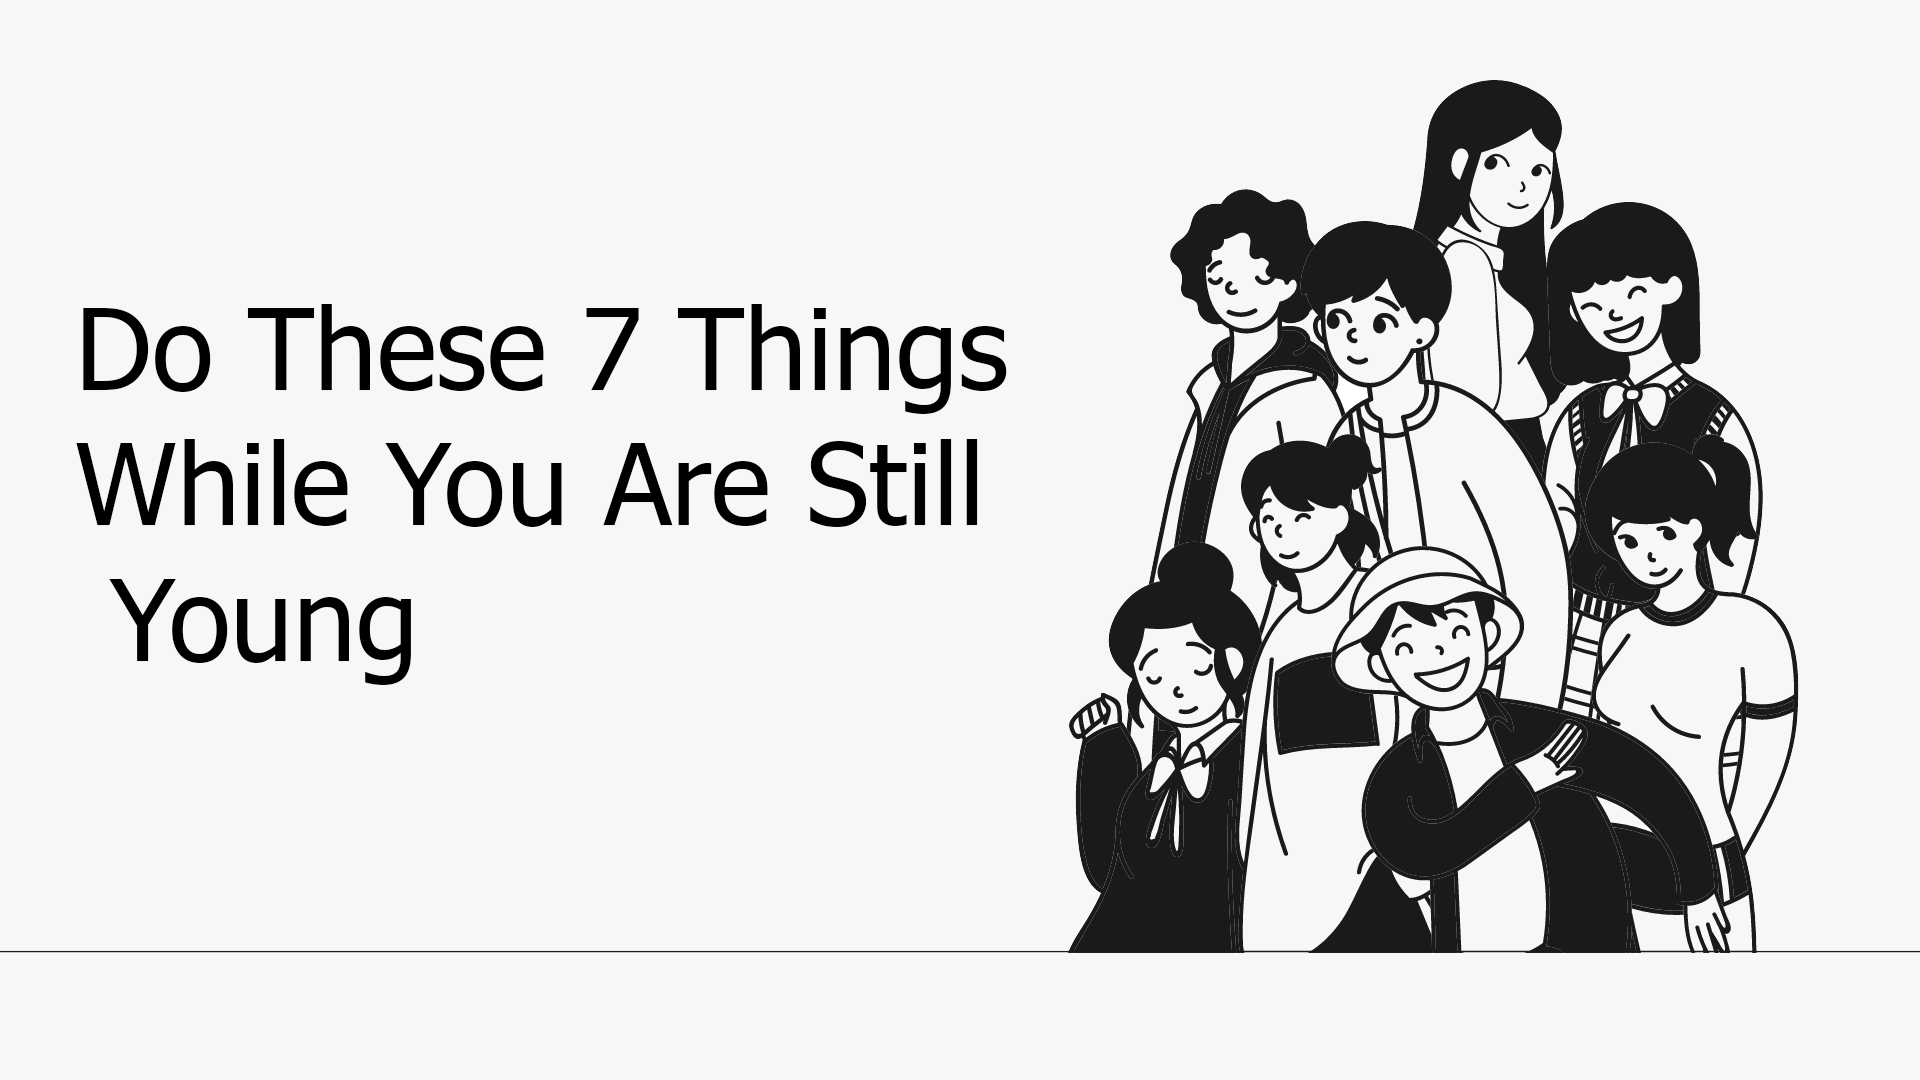 Do These 7 Things While You Are Still Young